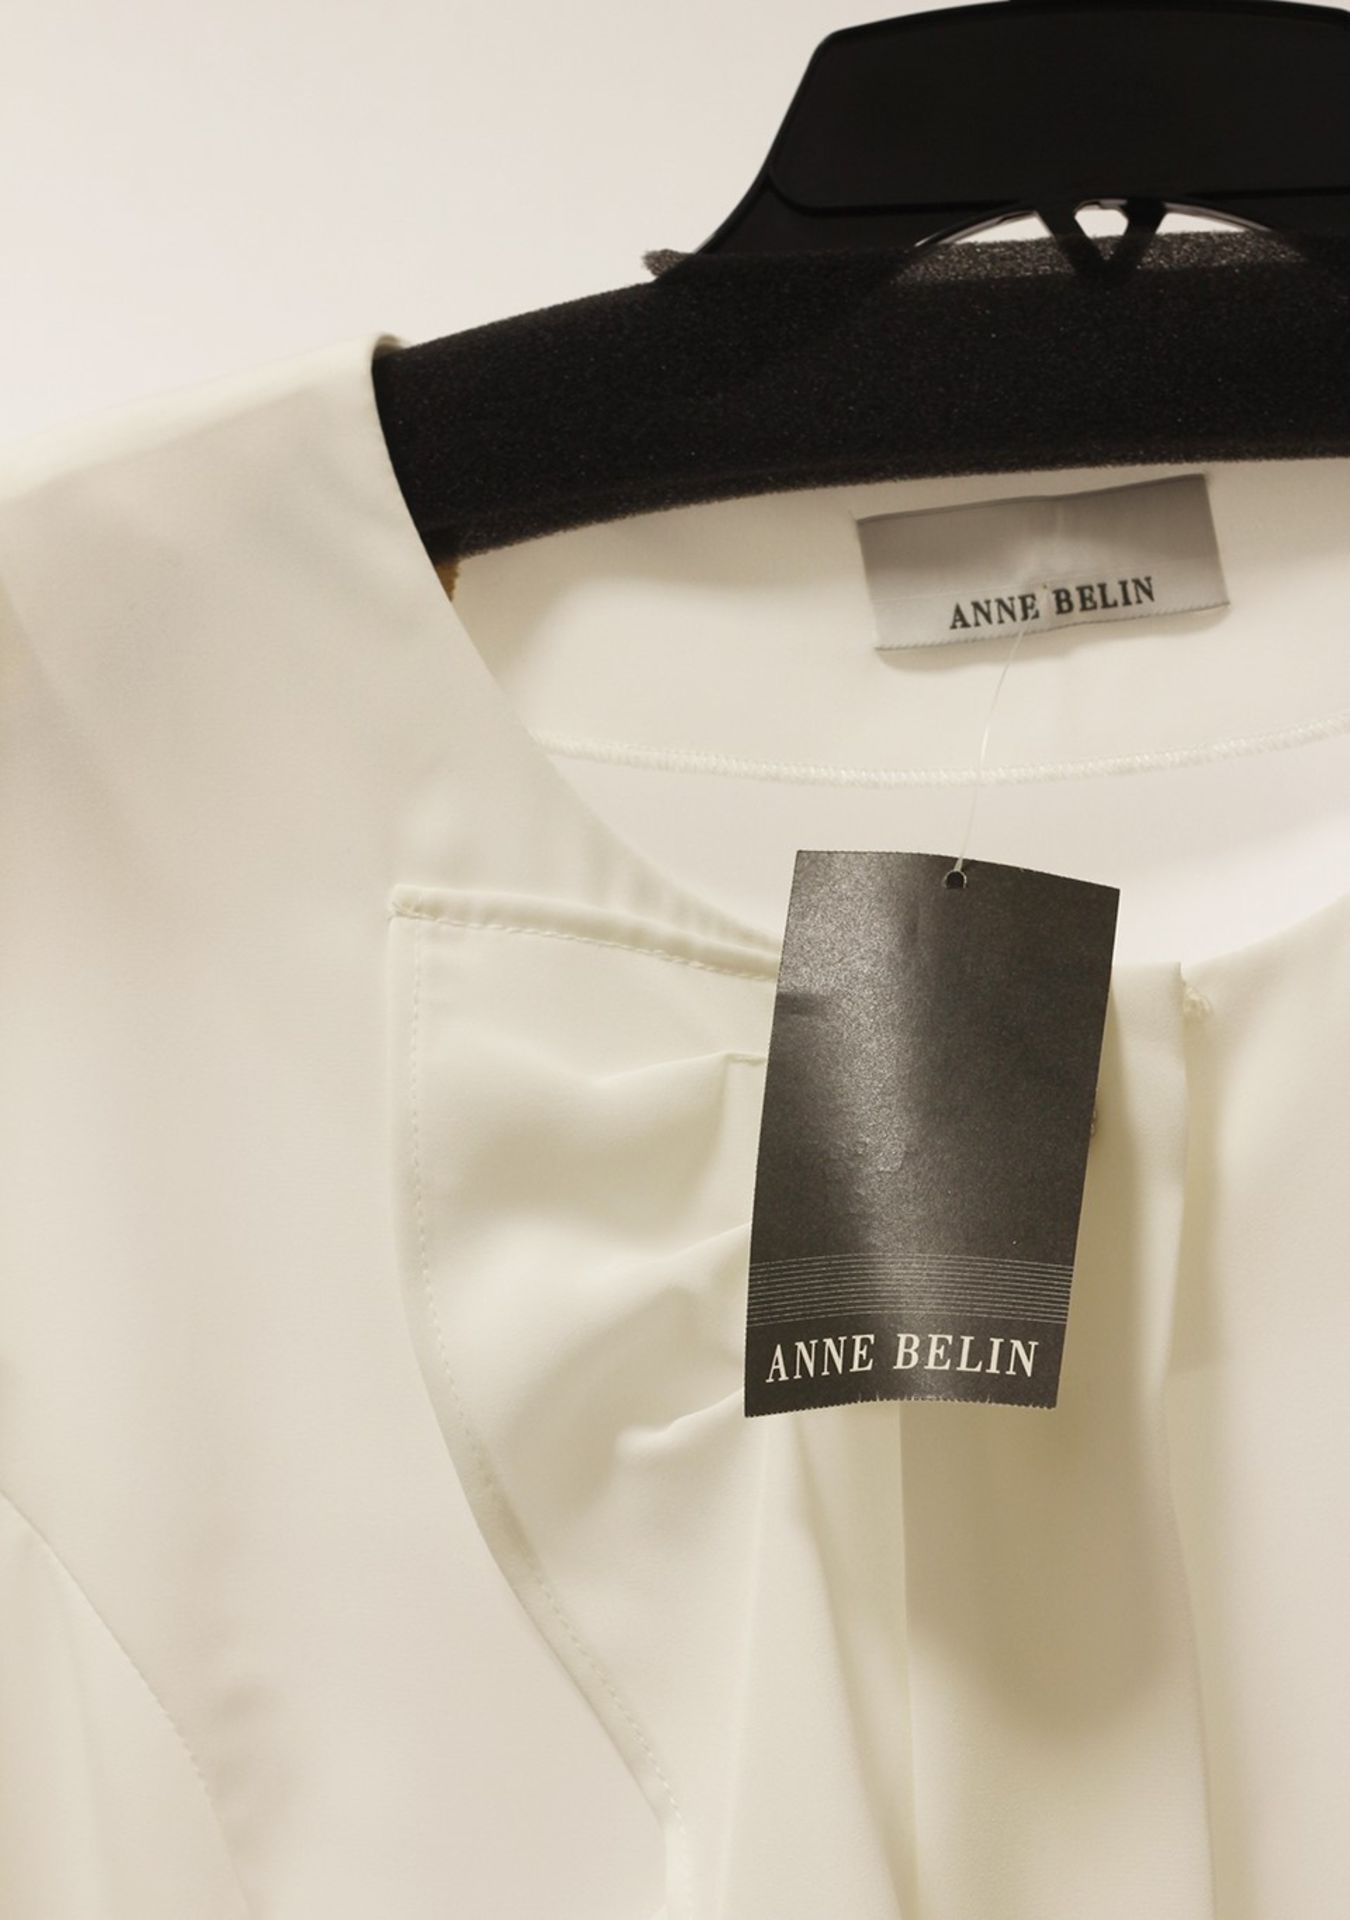 1 x Anne Belin White Shirt - Size: 18 - Material: 100% Polyester - From a High End Clothing Boutique - Image 9 of 9